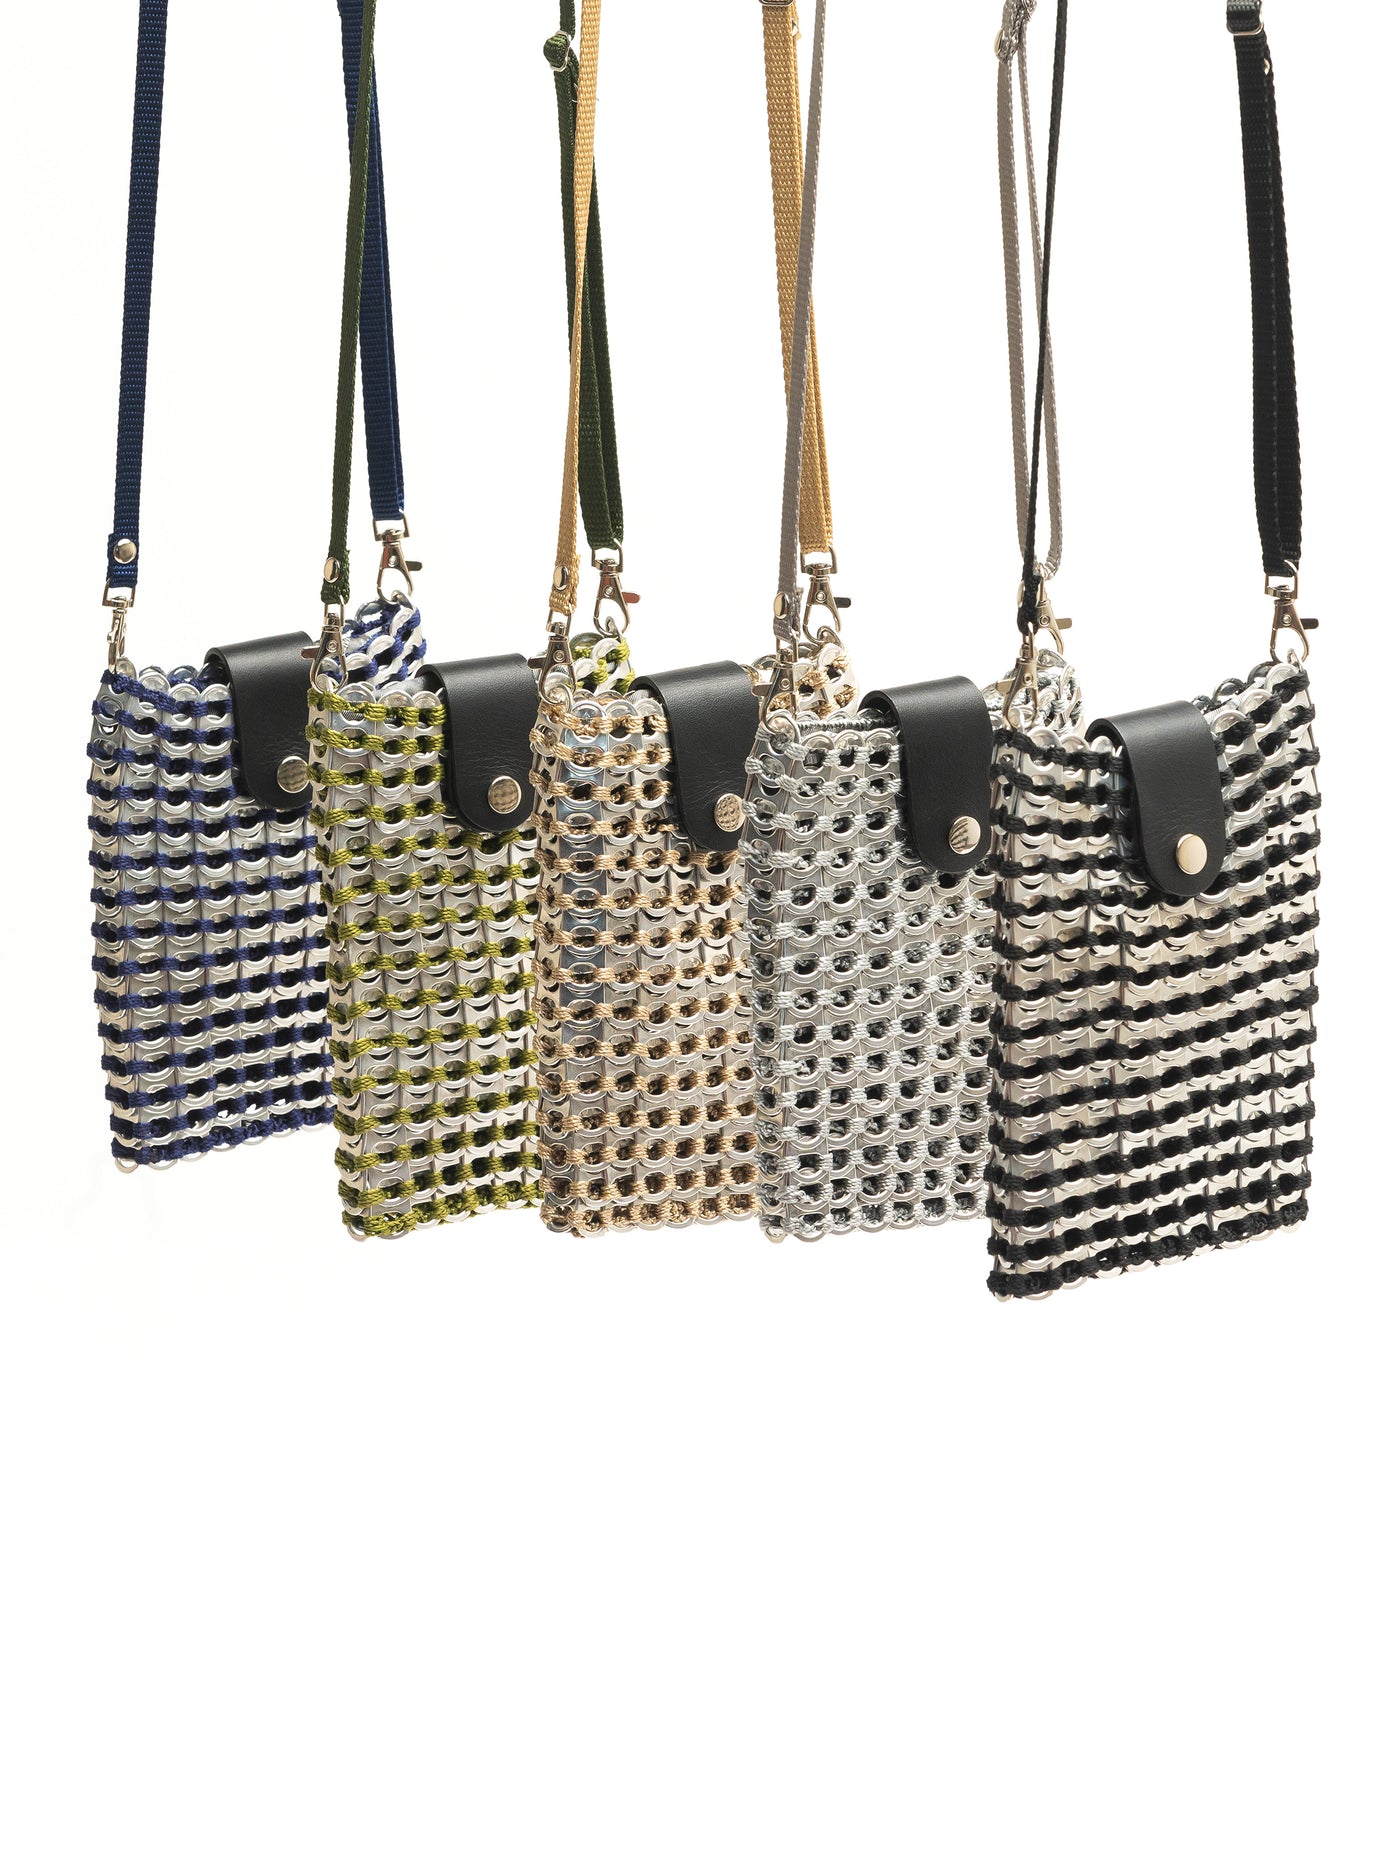 alt="five assorted colored crossbody cell phone bags made of upcycled pop tabs suspended from above - escama studio"